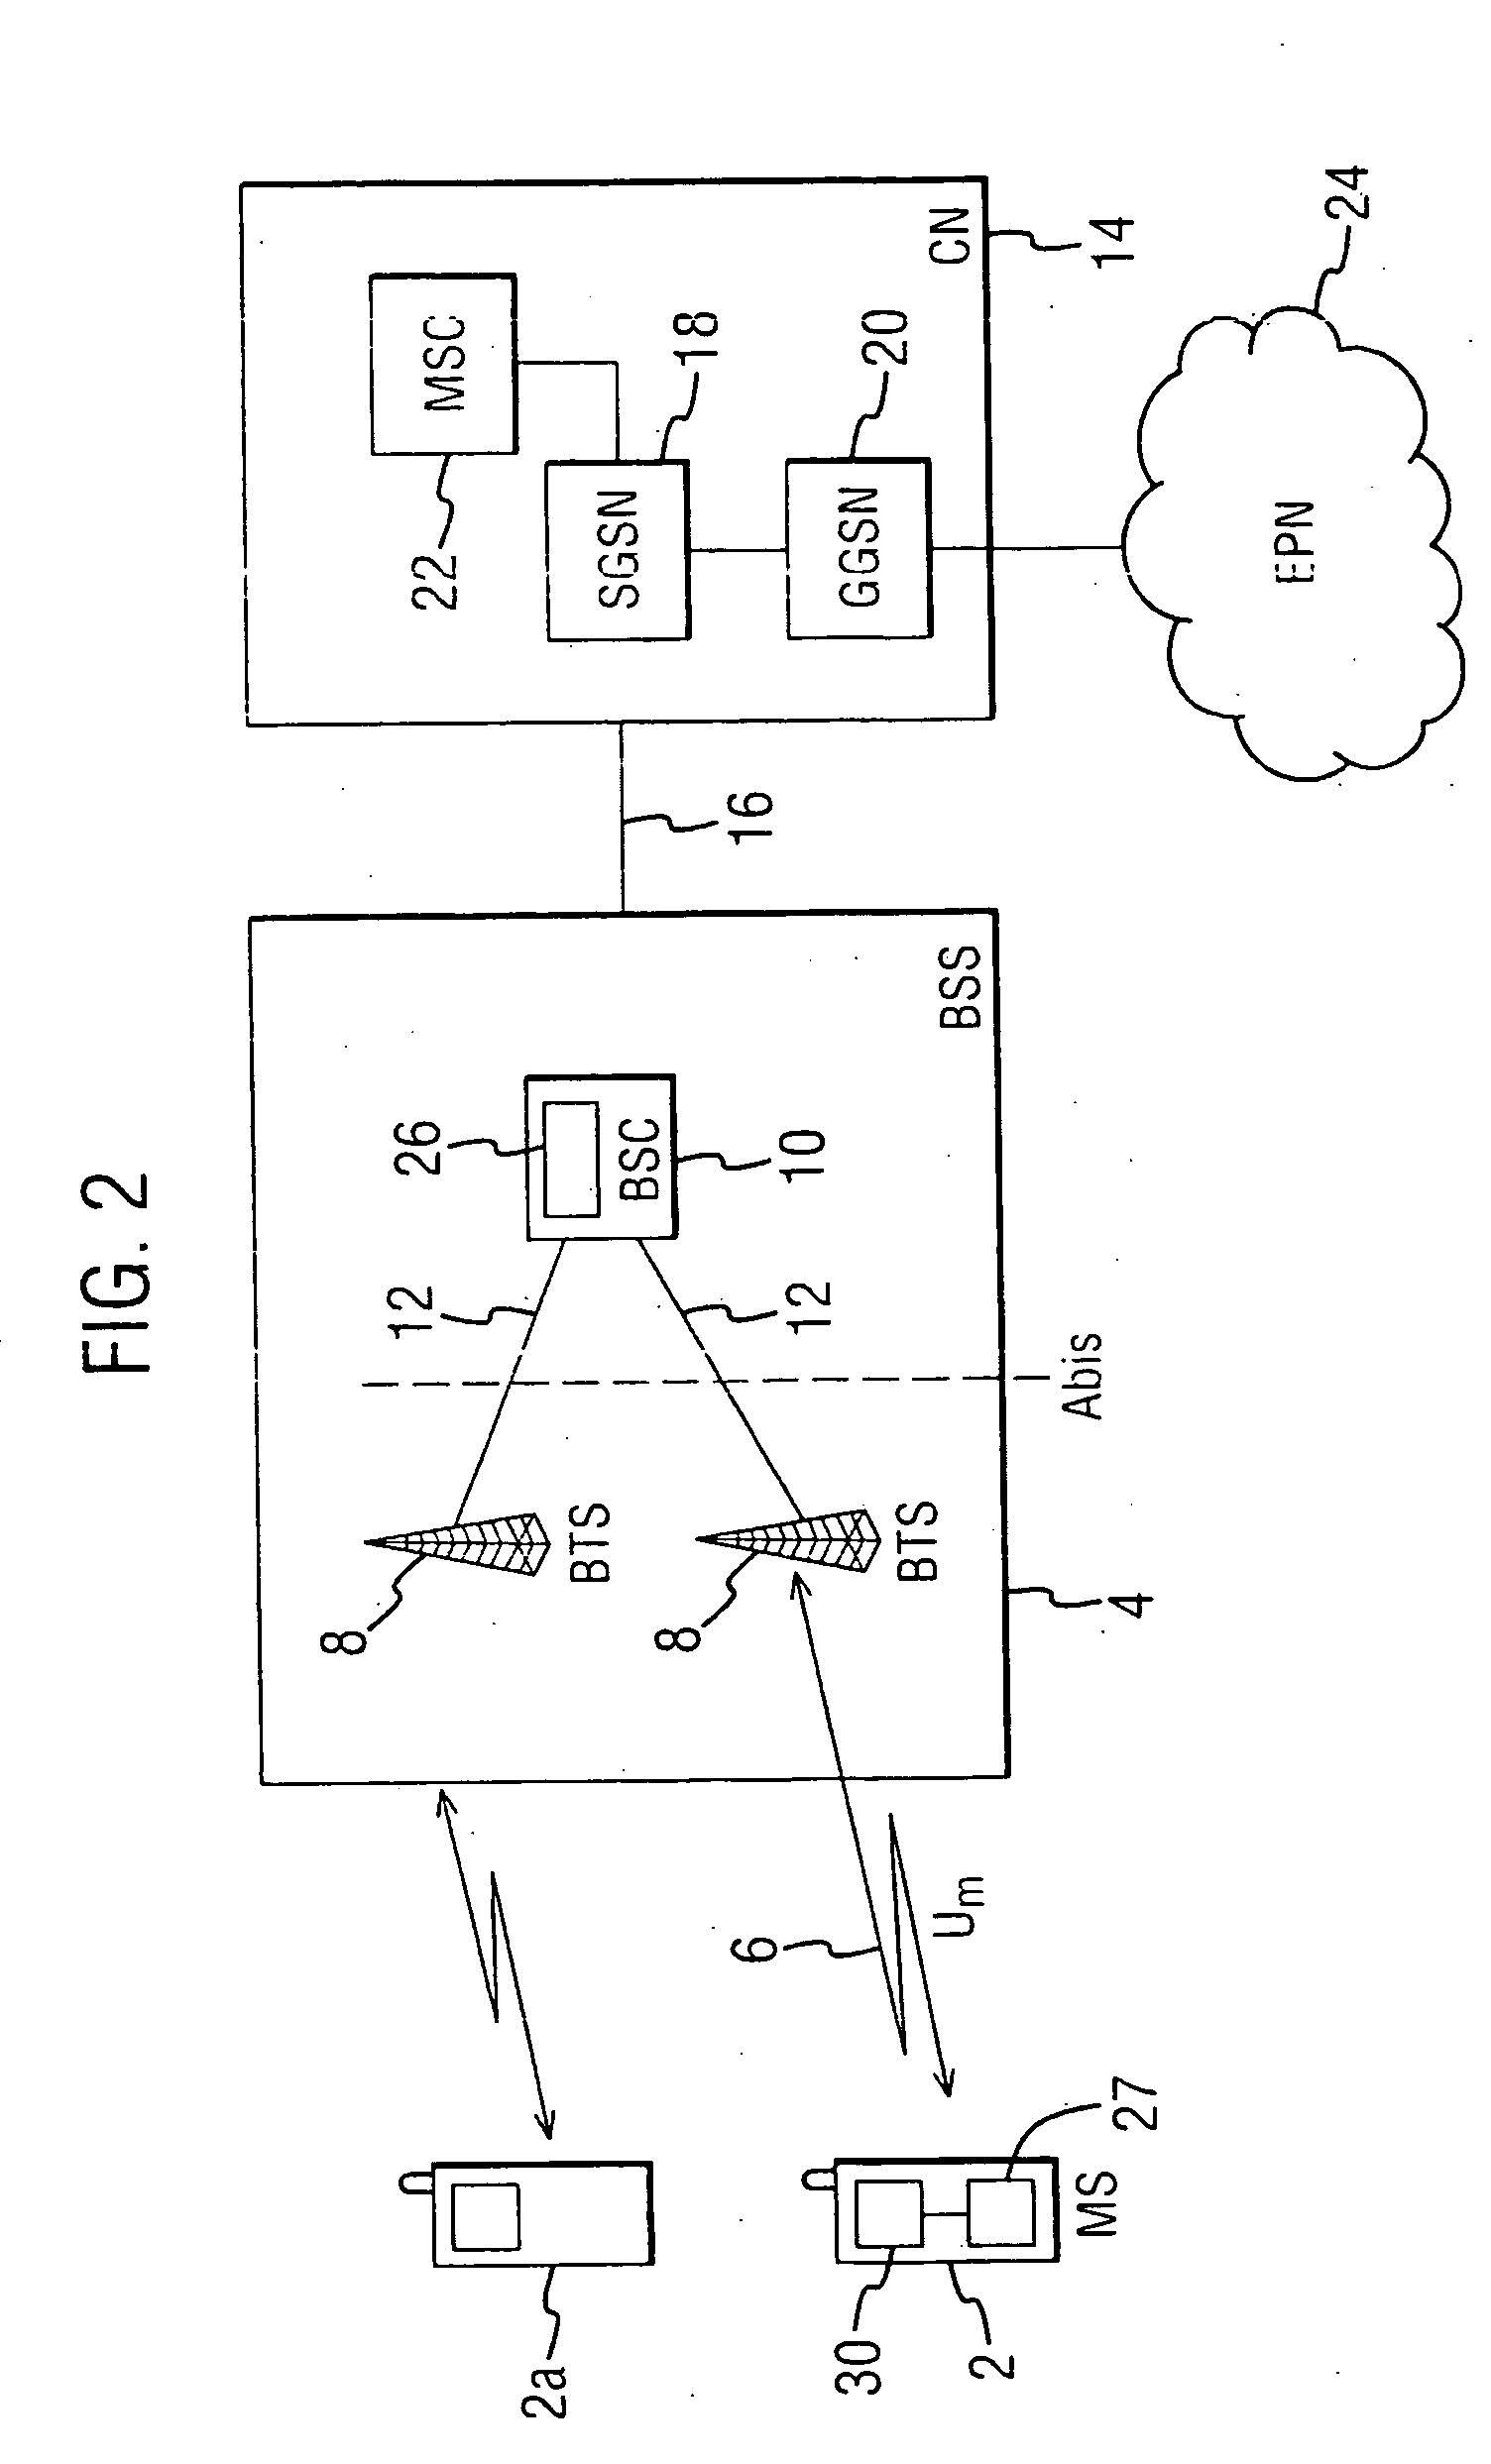 Monitoring quality of service in a wireless communications network